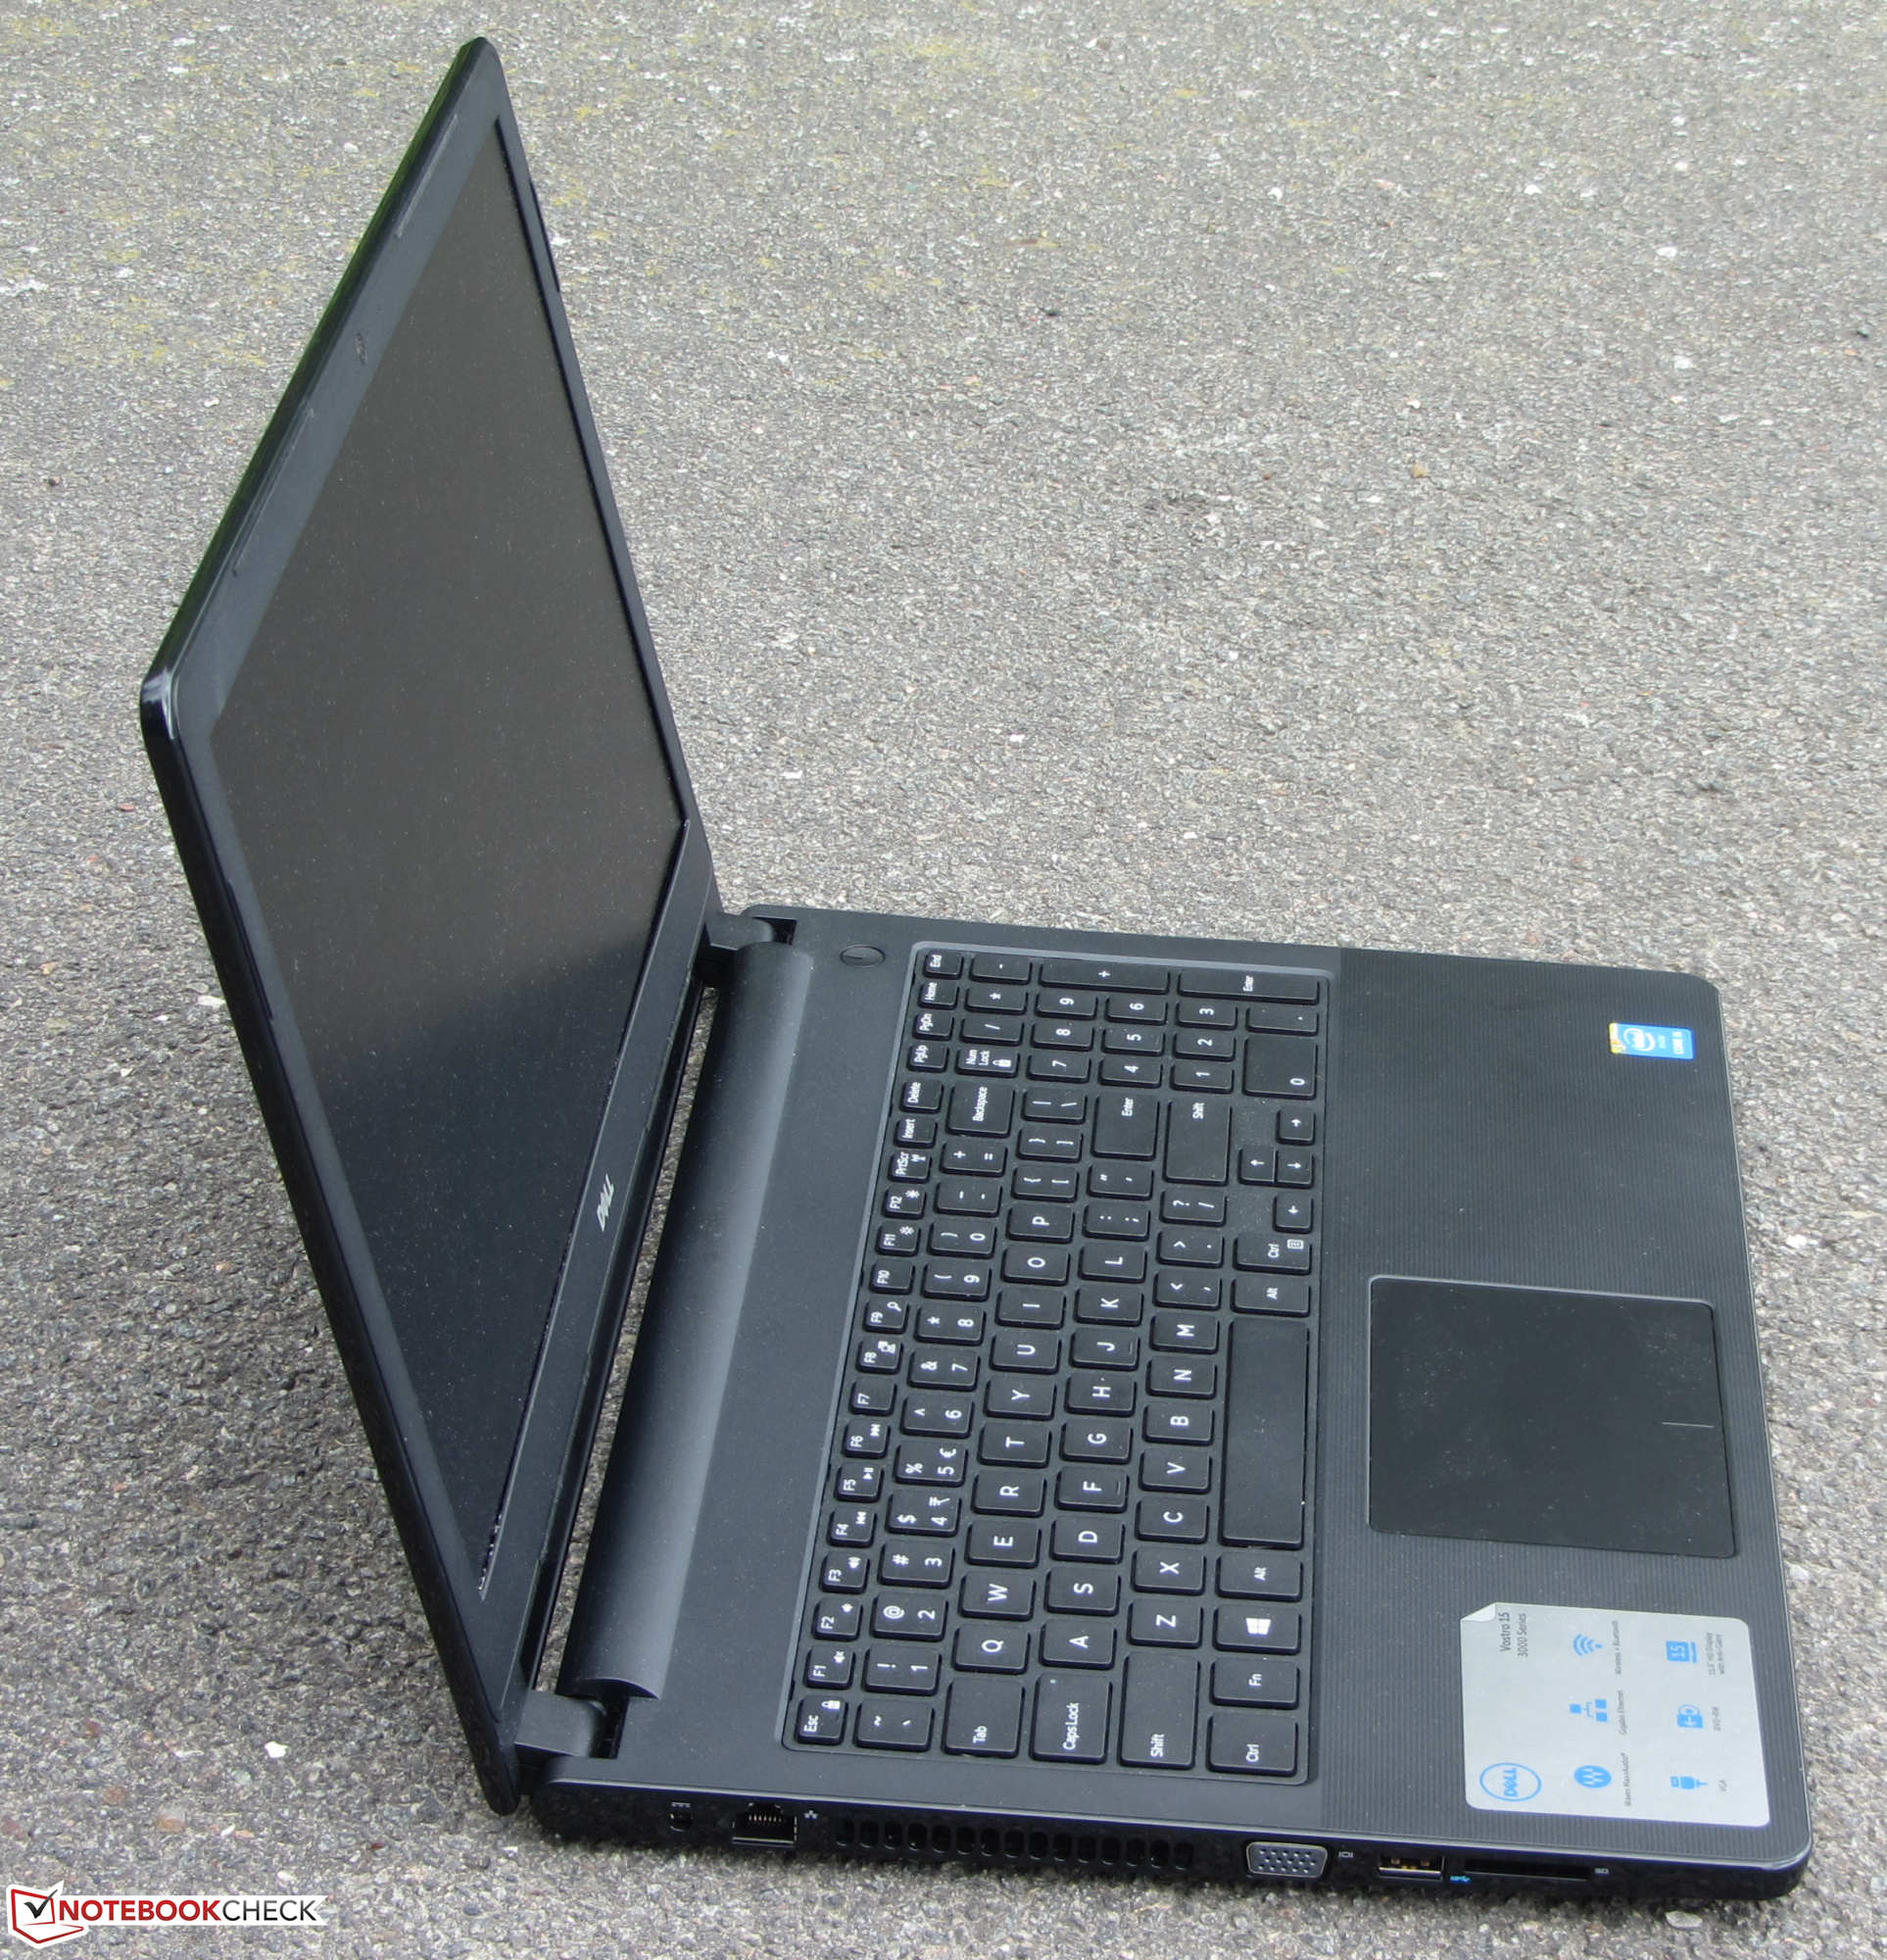 Dell Vostro 15 3558 Notebook Review - NotebookCheck.net Reviews